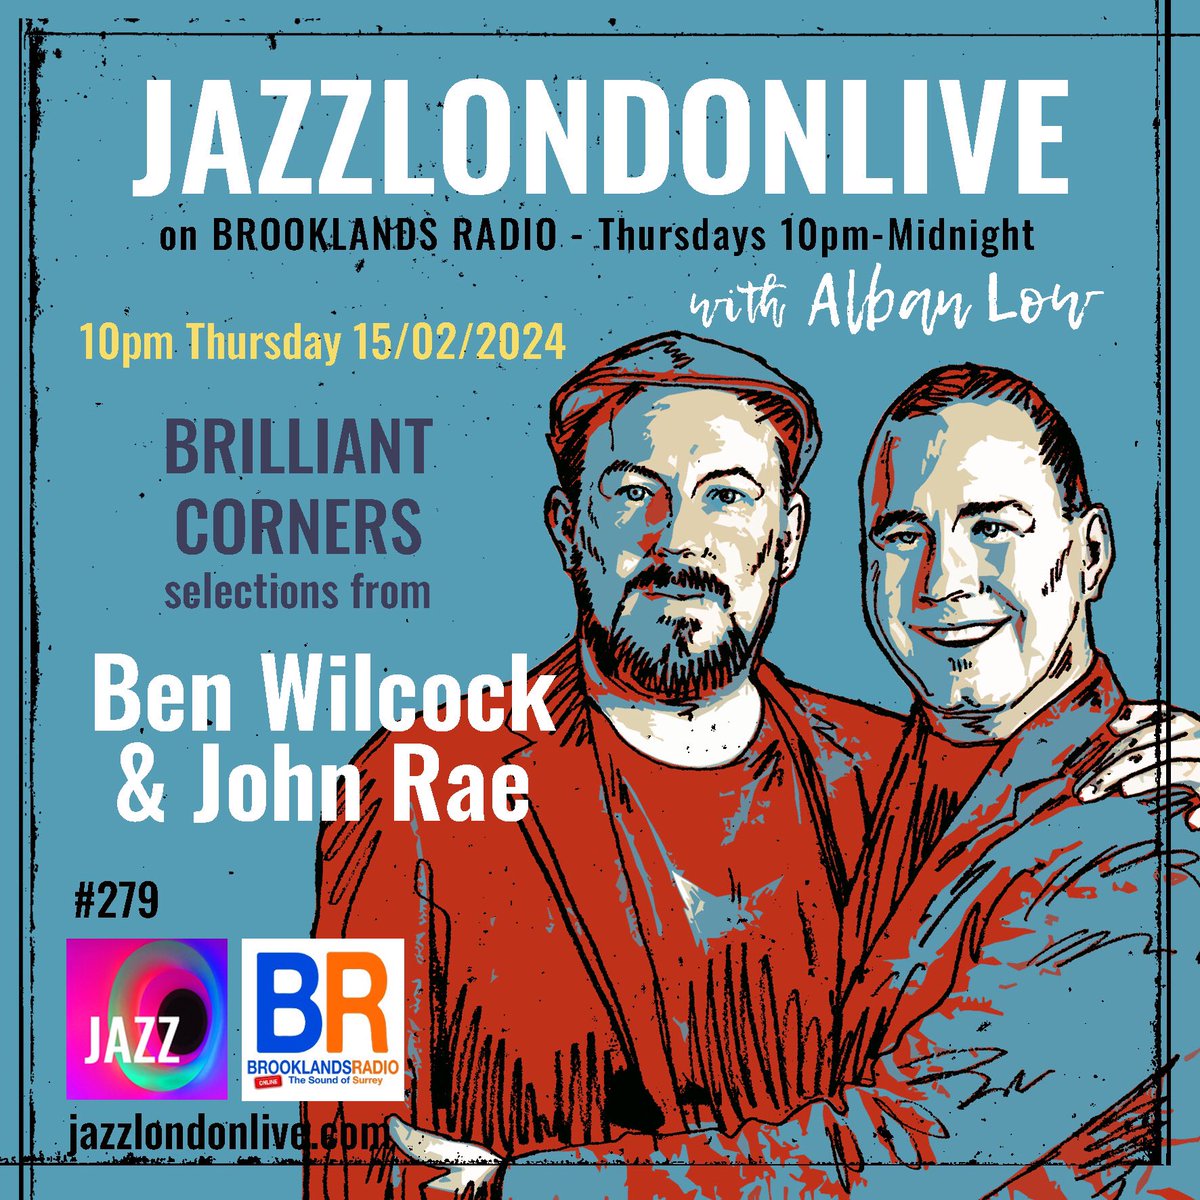 Tune into @jazzlondonlive this Thursday @brooklandsradio to hear the influences behind NZ pianist Ben Wilcock and Wellington-based Scottish drummer John Rae’s enthusiastically received new album, Splendid Isolation.